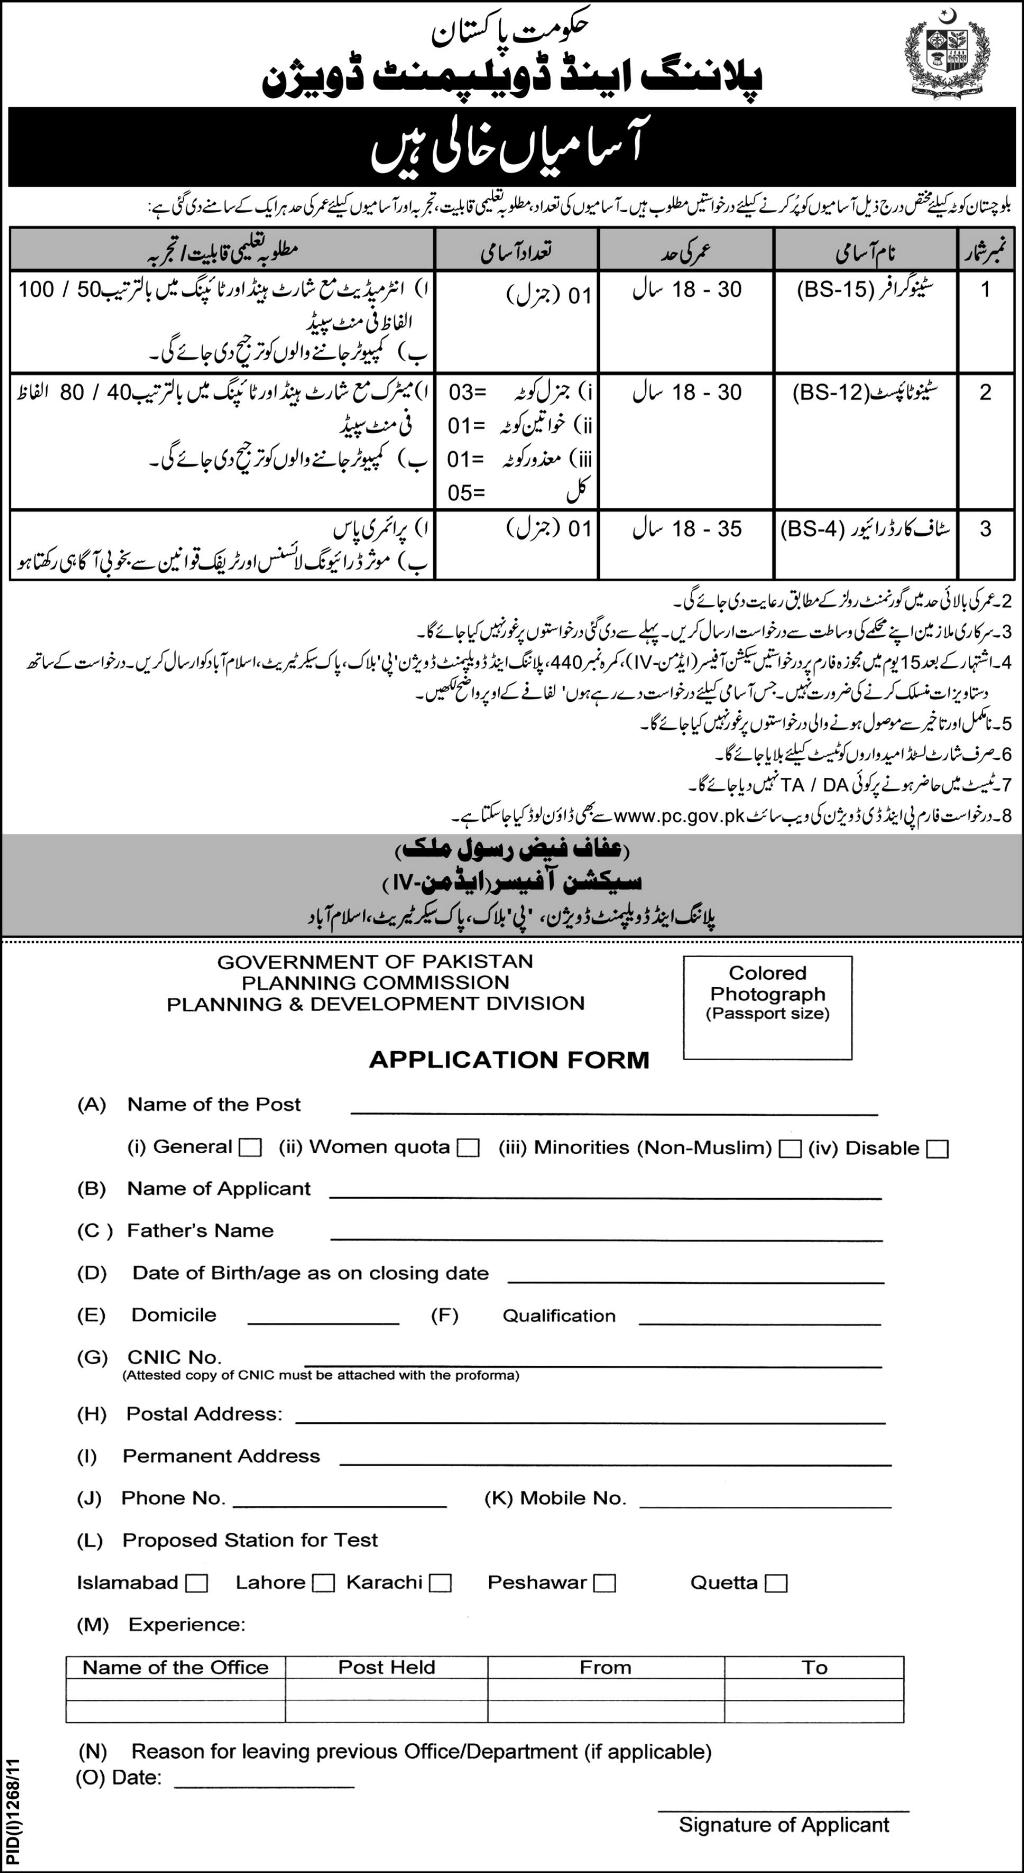 Positions Vacant in Planning and Development Division Govt. of Pakistan